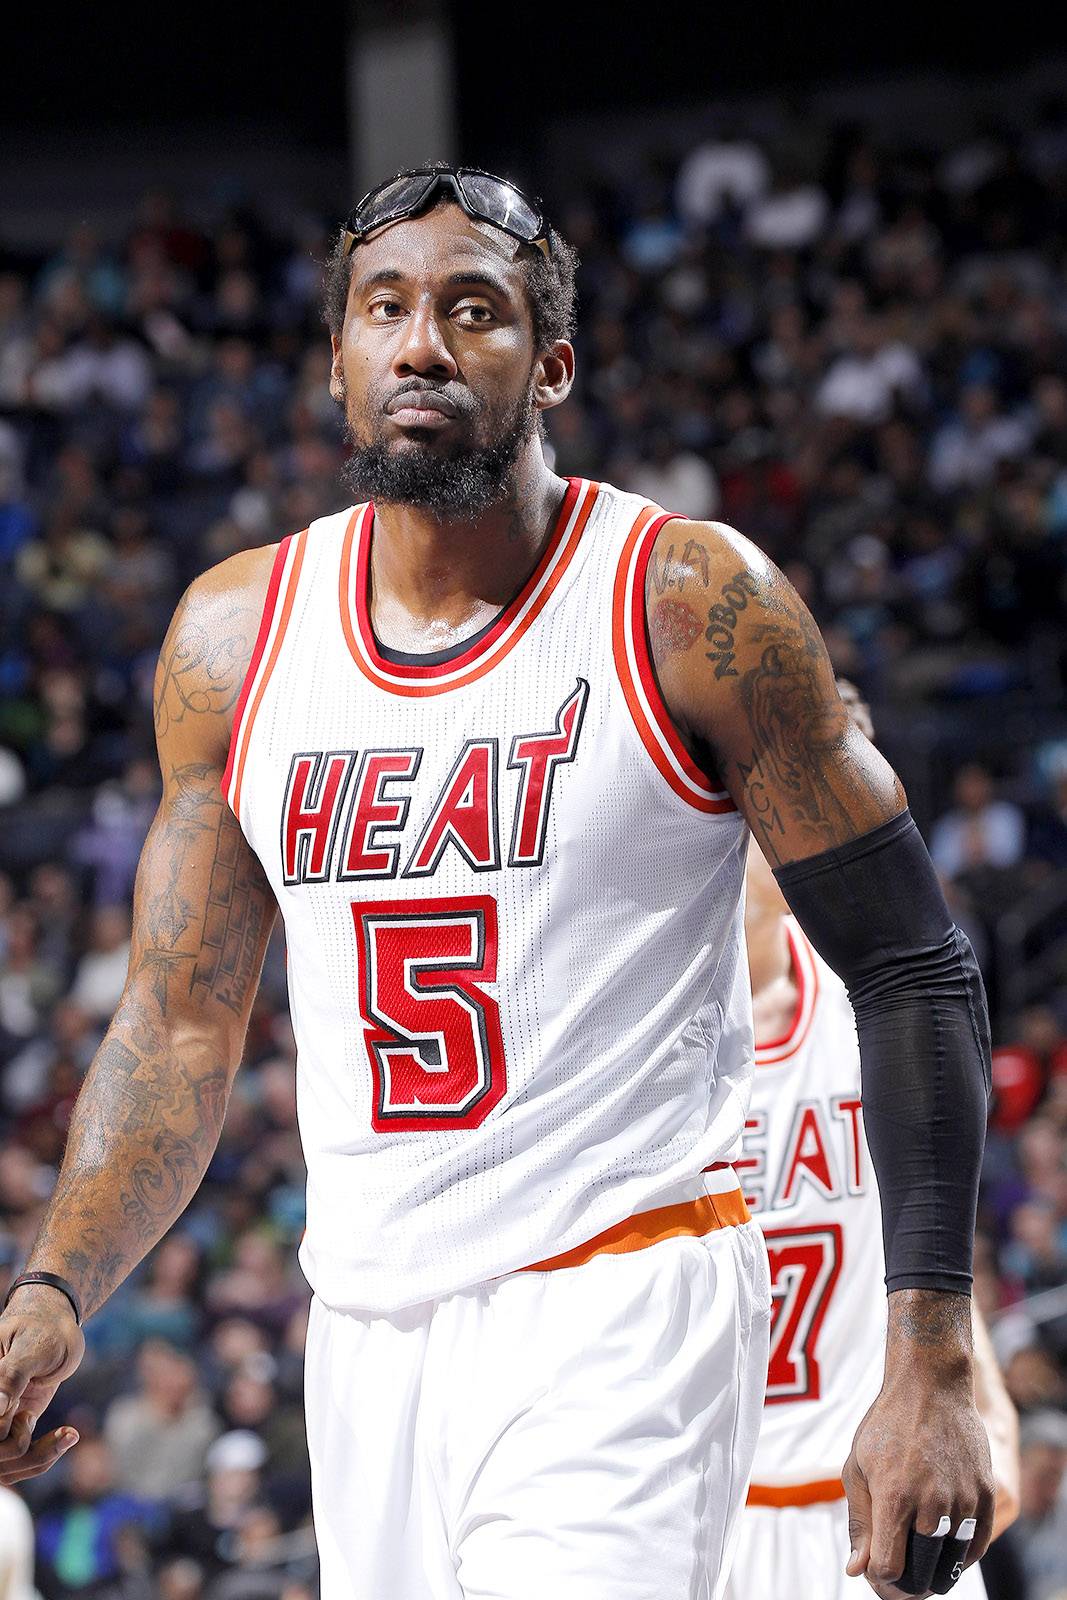 Exclusive: Amar'e Stoudemire Settles Child Support Suit With